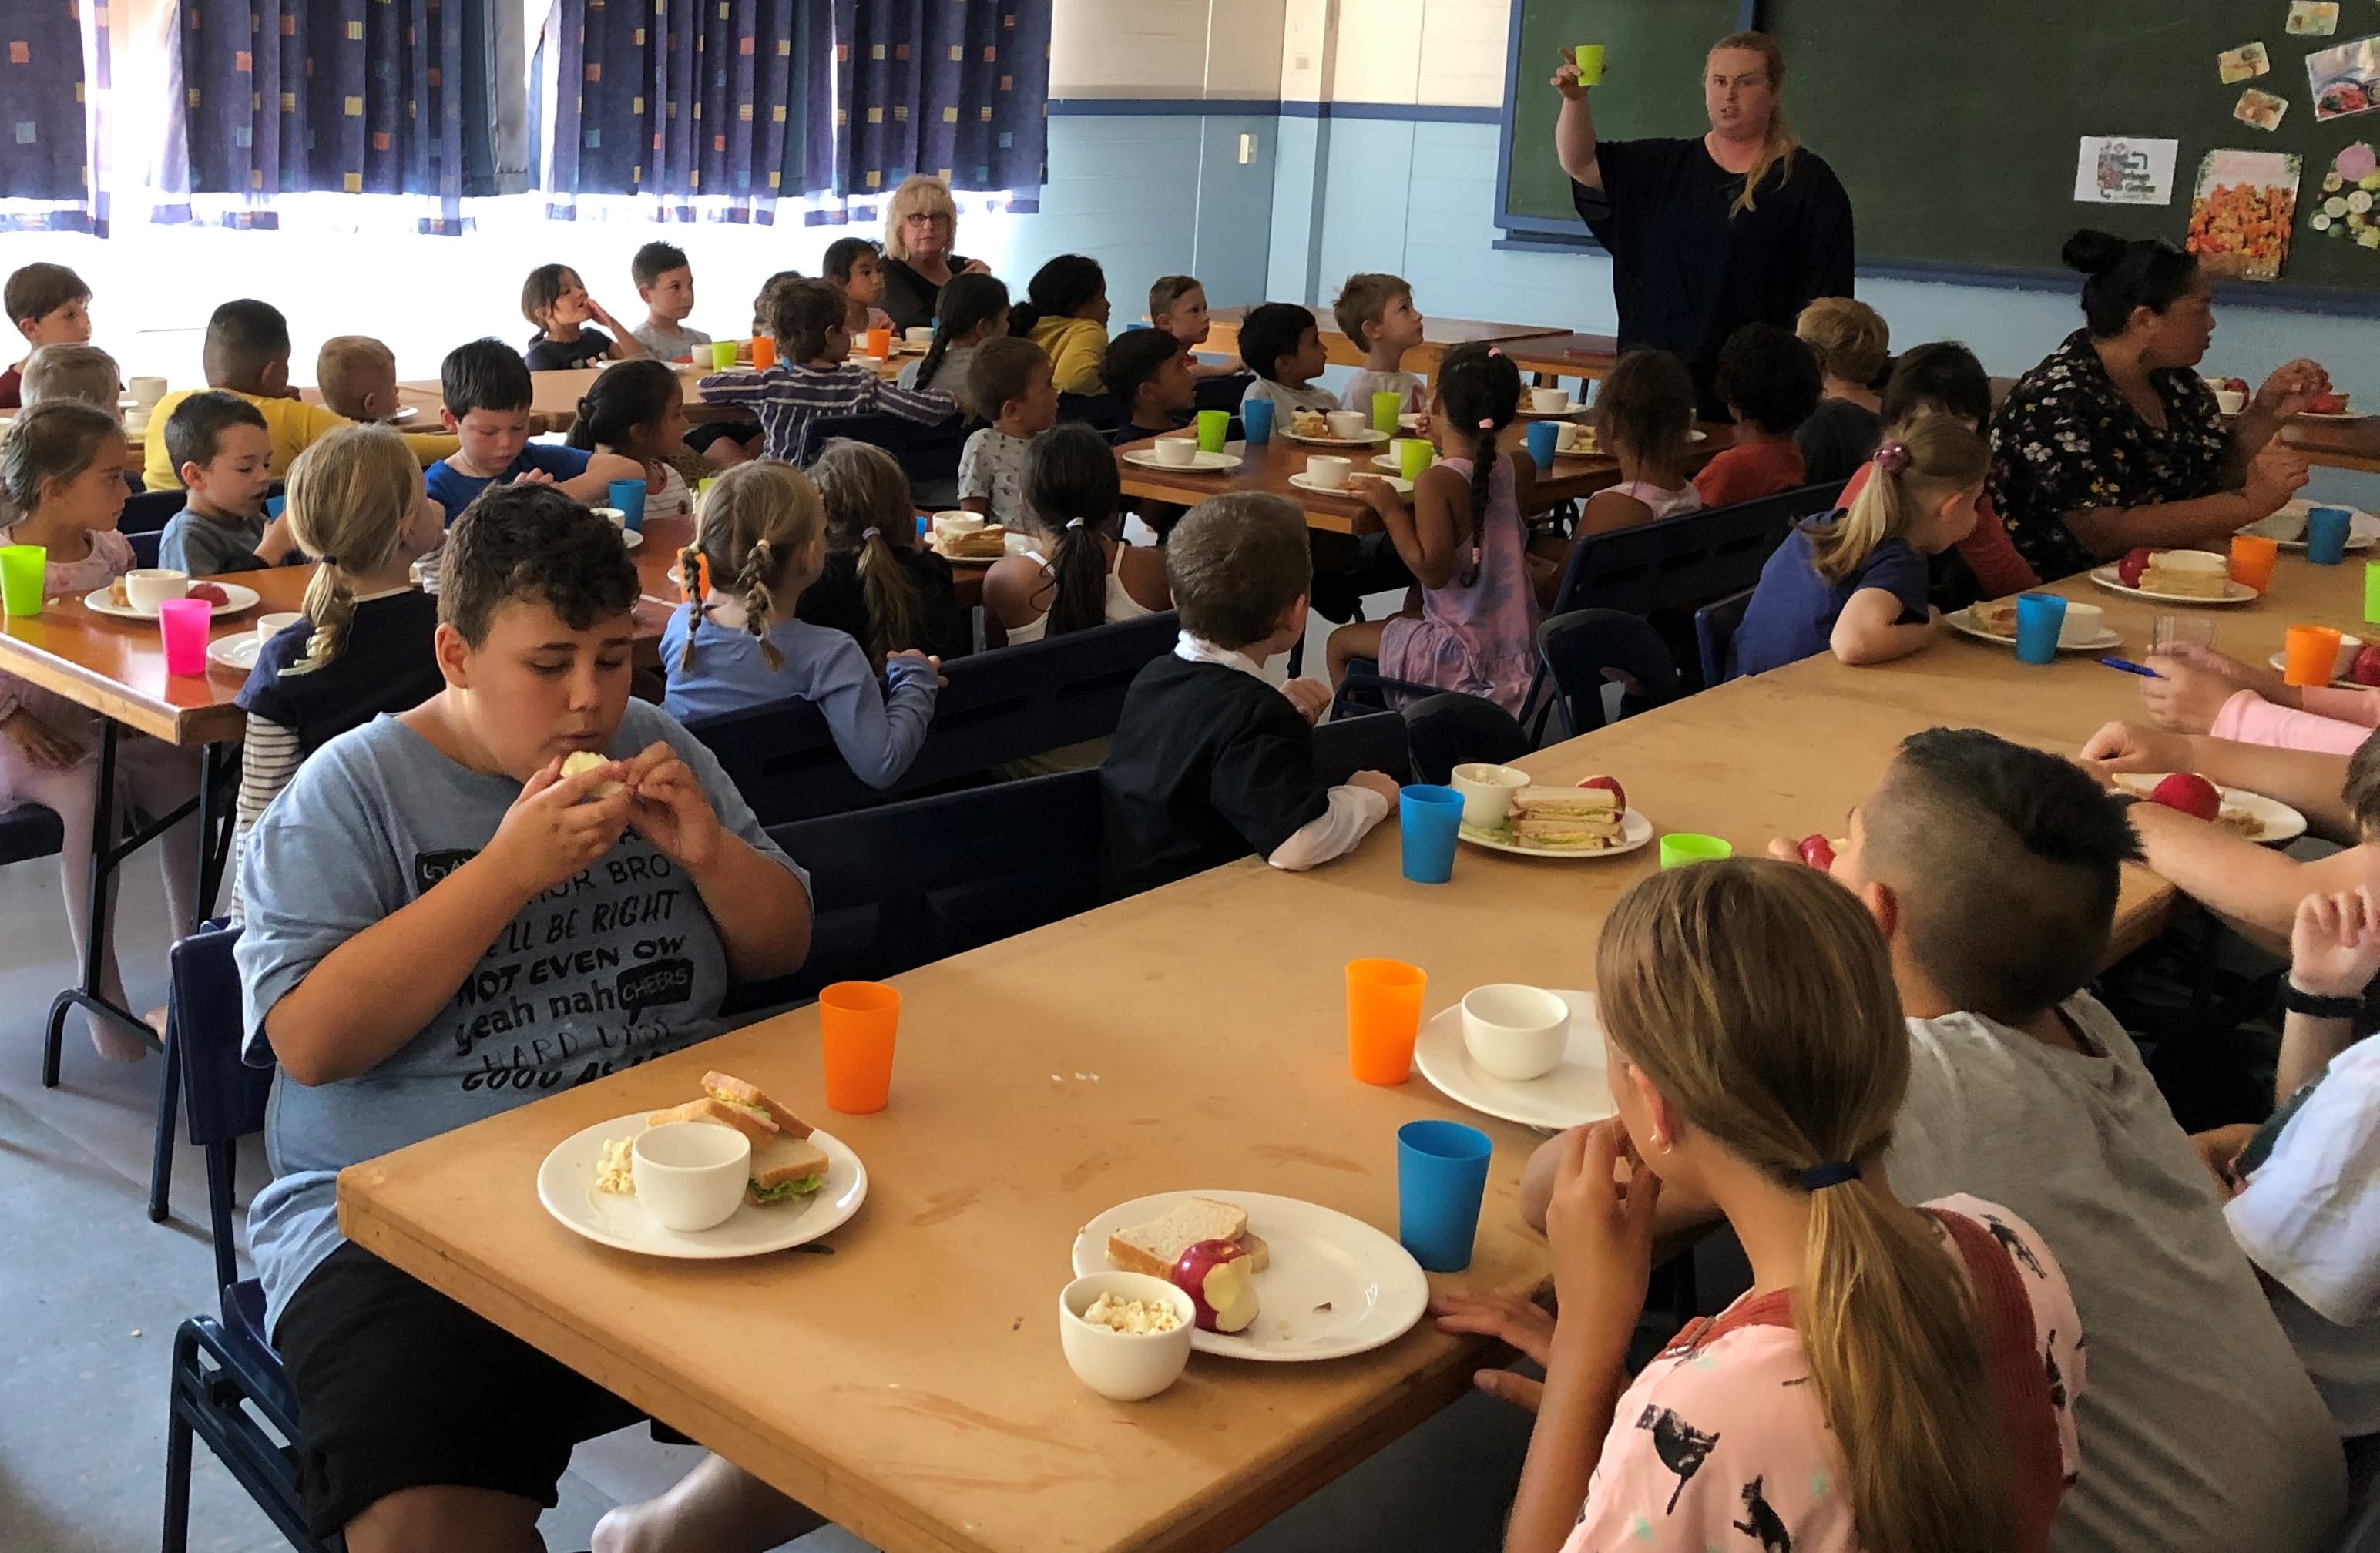 Lunch time at Shannon School.